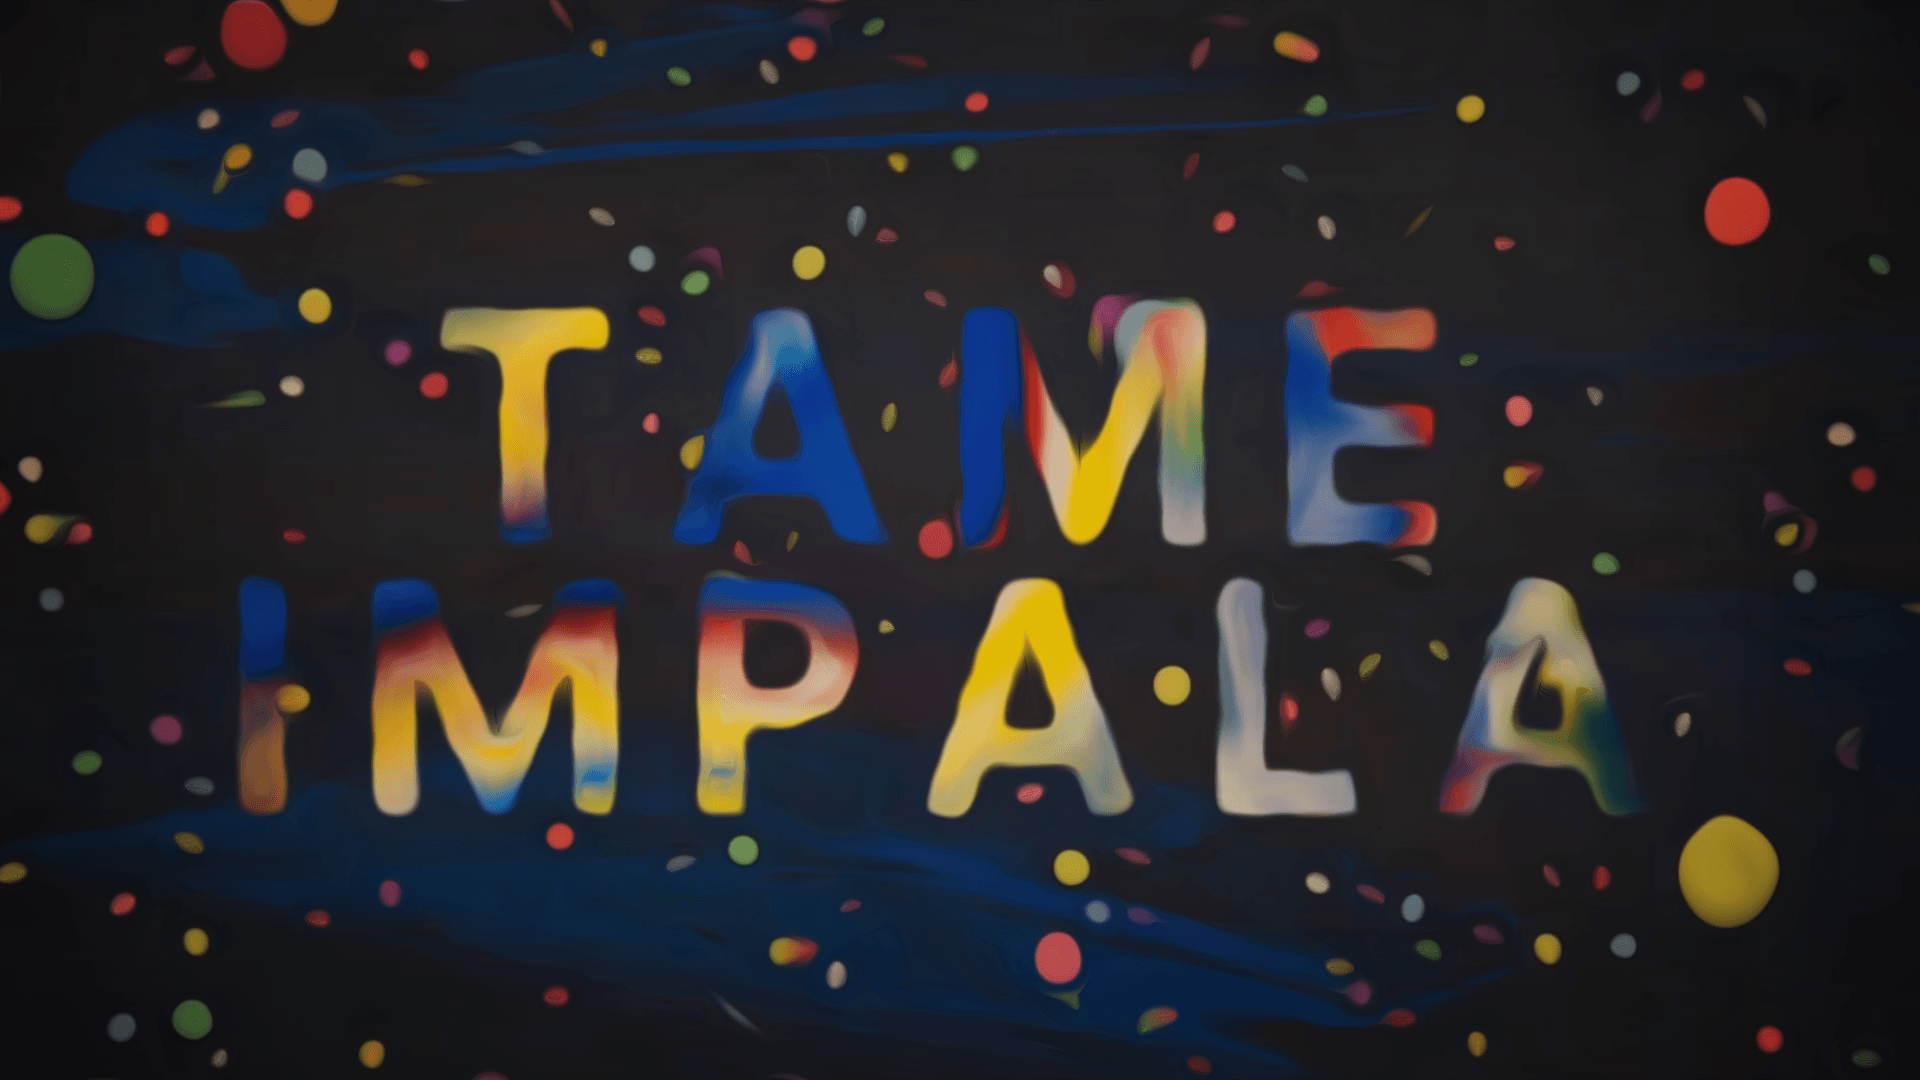 I made the Tame Impala wallpaper smoother in Photohop, tell me if